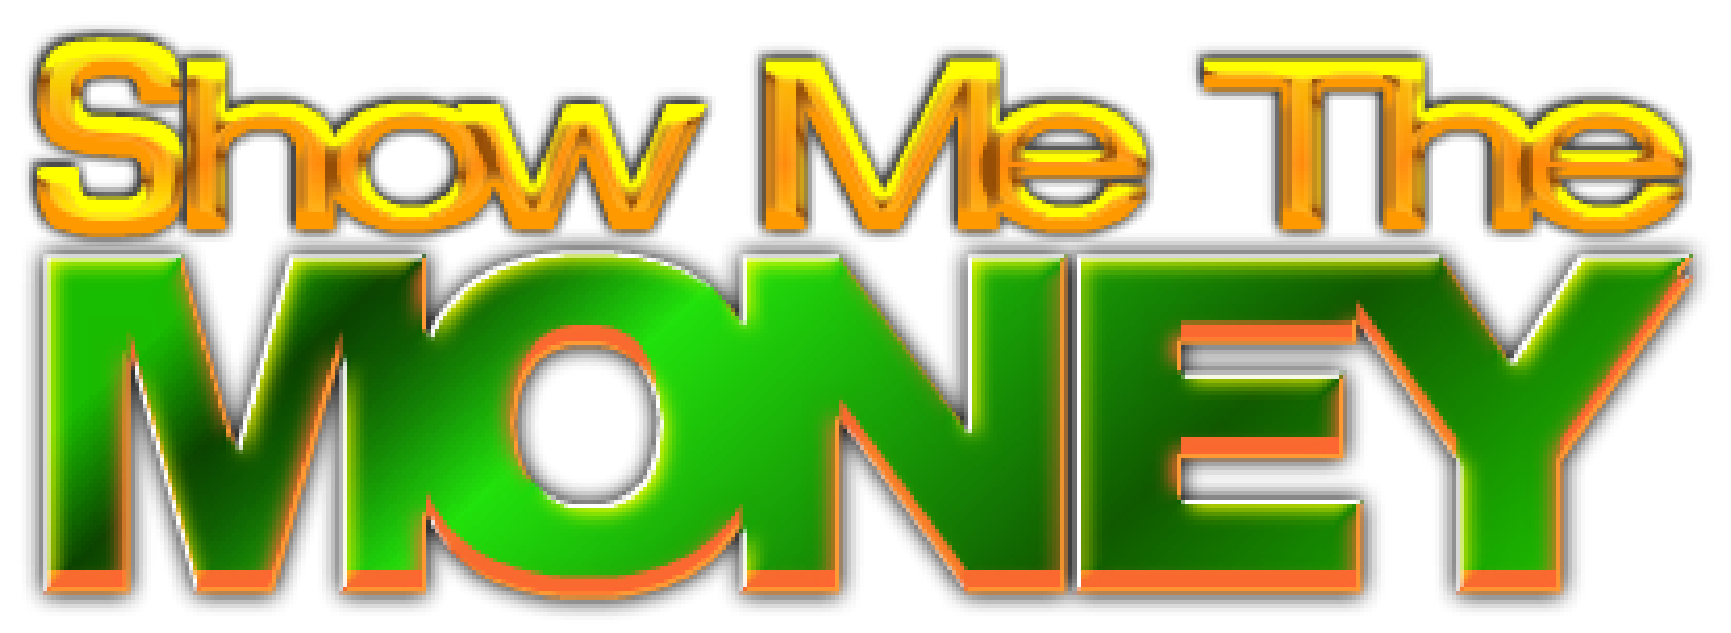 Show Me the Money (U.S. Syndicated Game Show)				Fan Feed